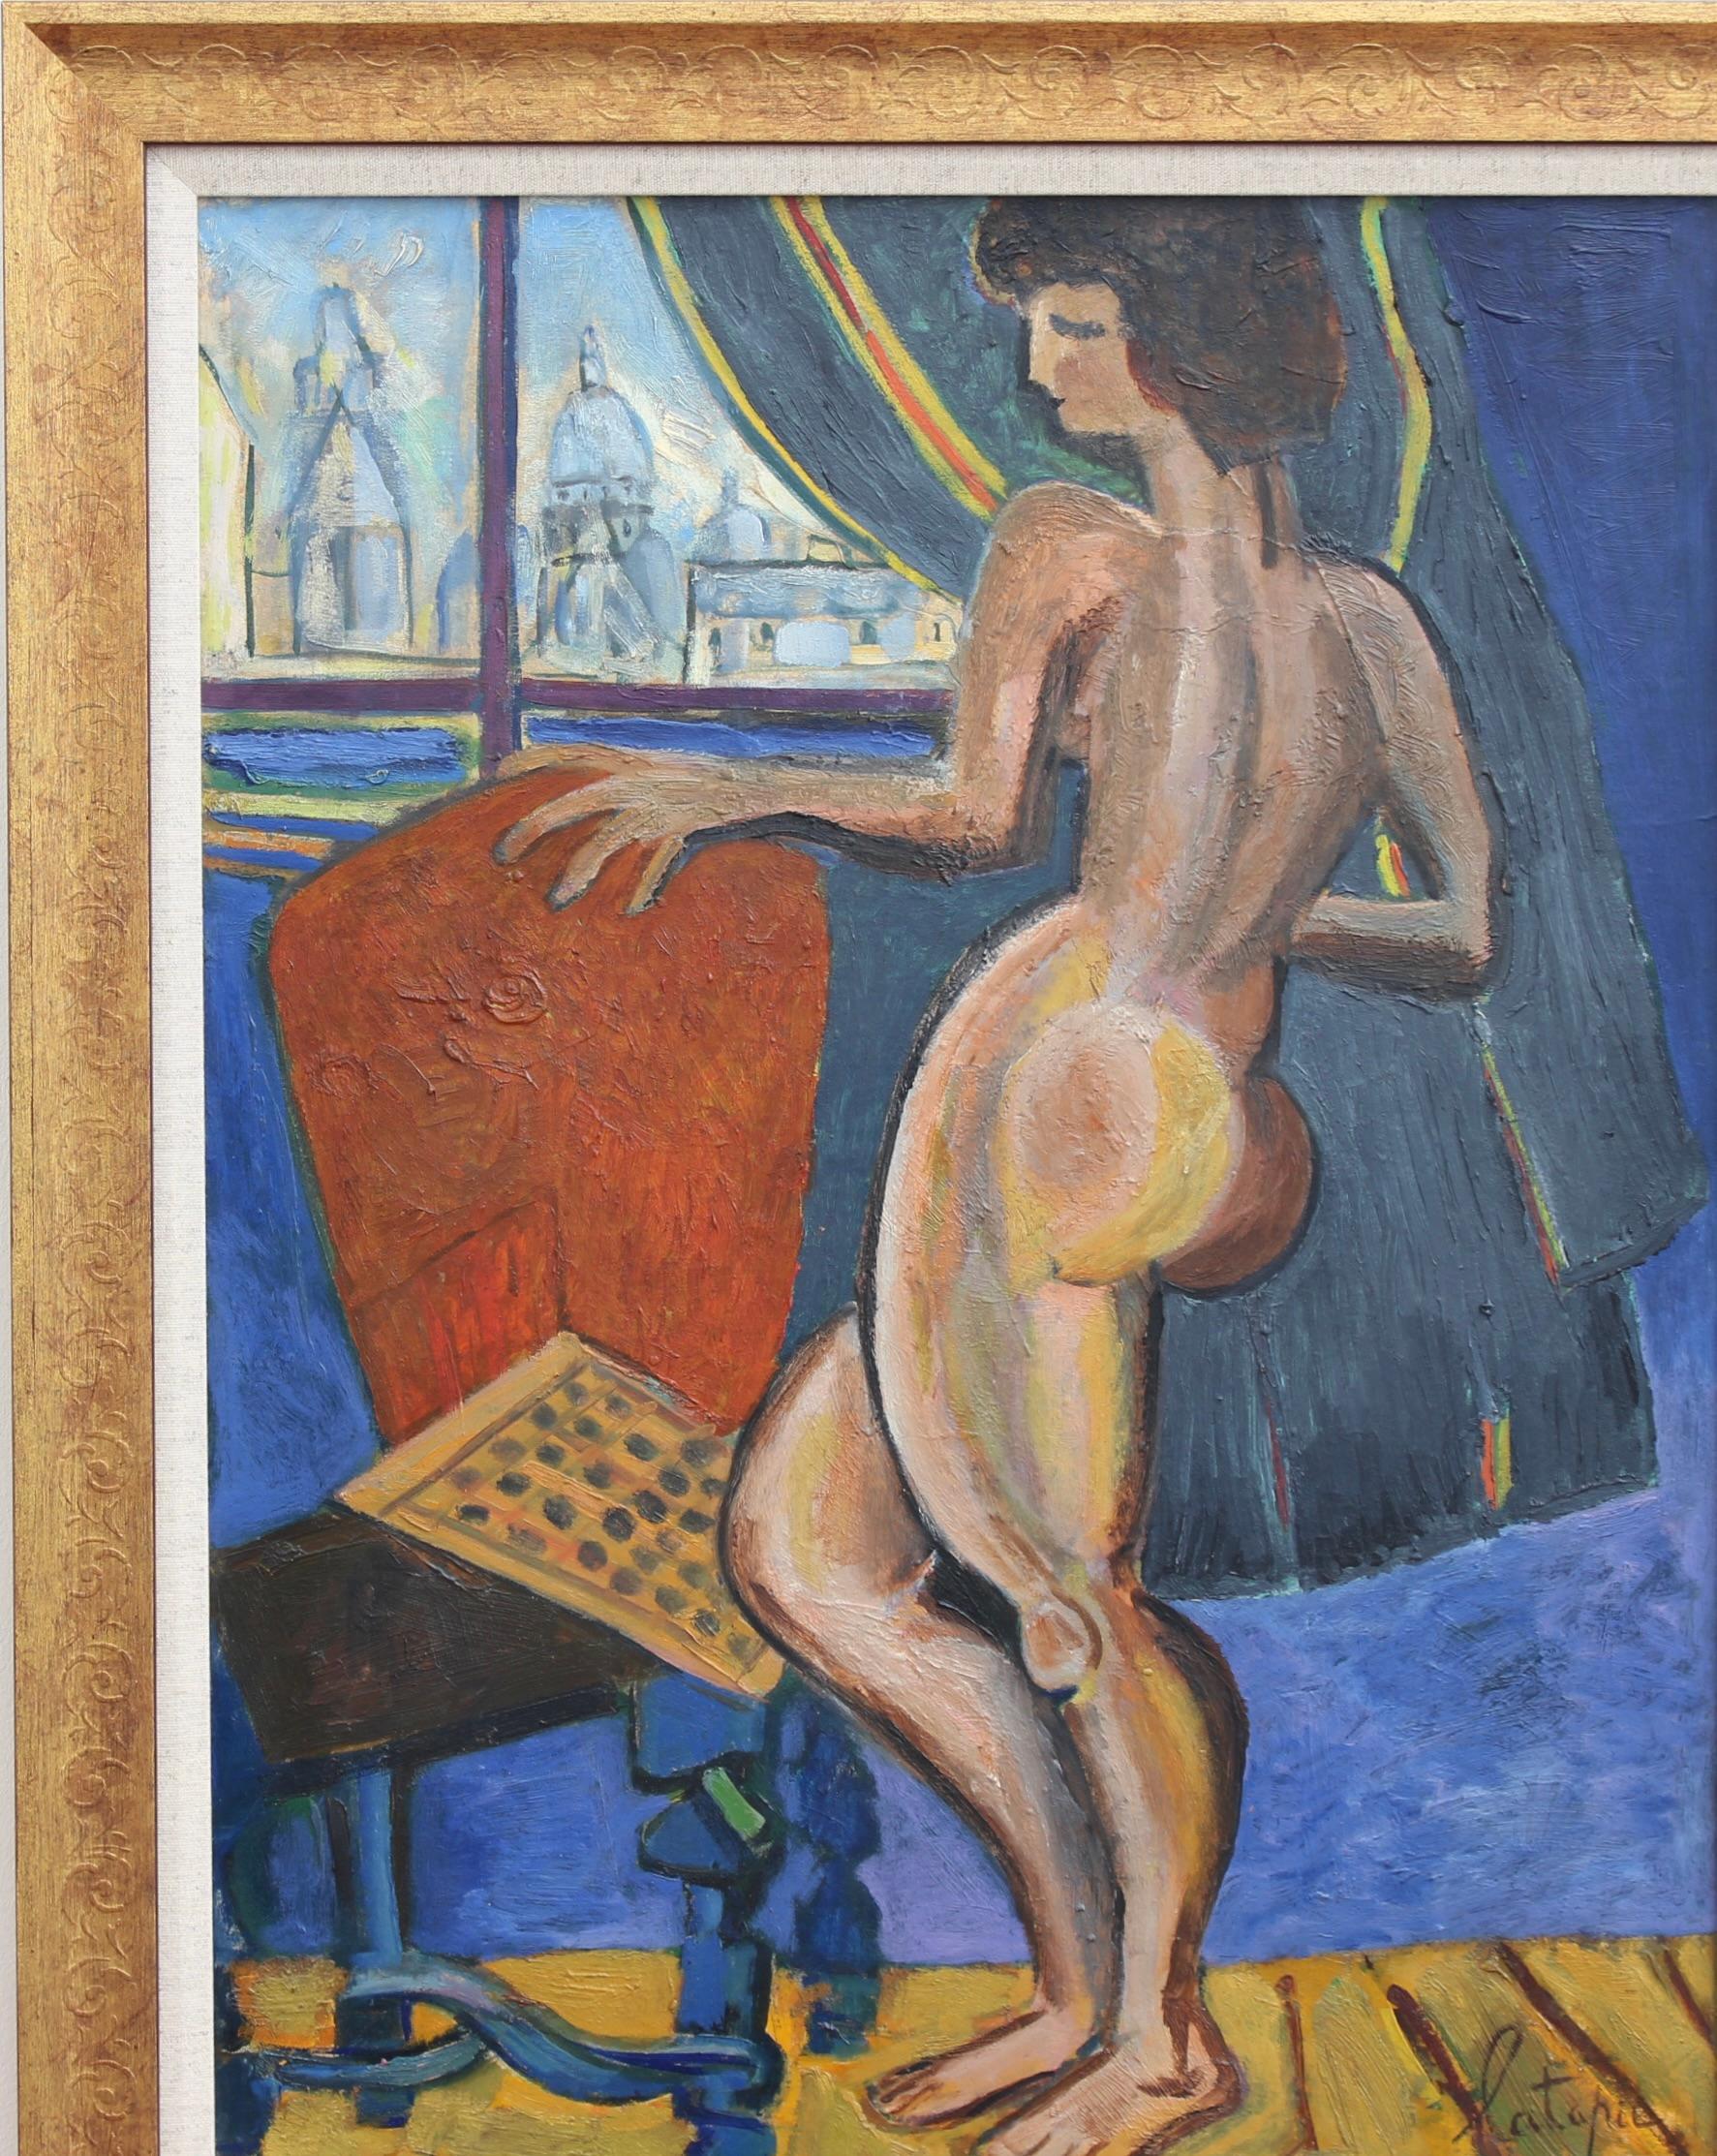 'Nude at the Window Overlooking Sacré-Coeur', oil on paper mounted on canvas, by Louis Latapie (circa 1930s). Although later in Latapie's career he embraced cubism and abstraction, this piece is placed in his earlier expressionist and more